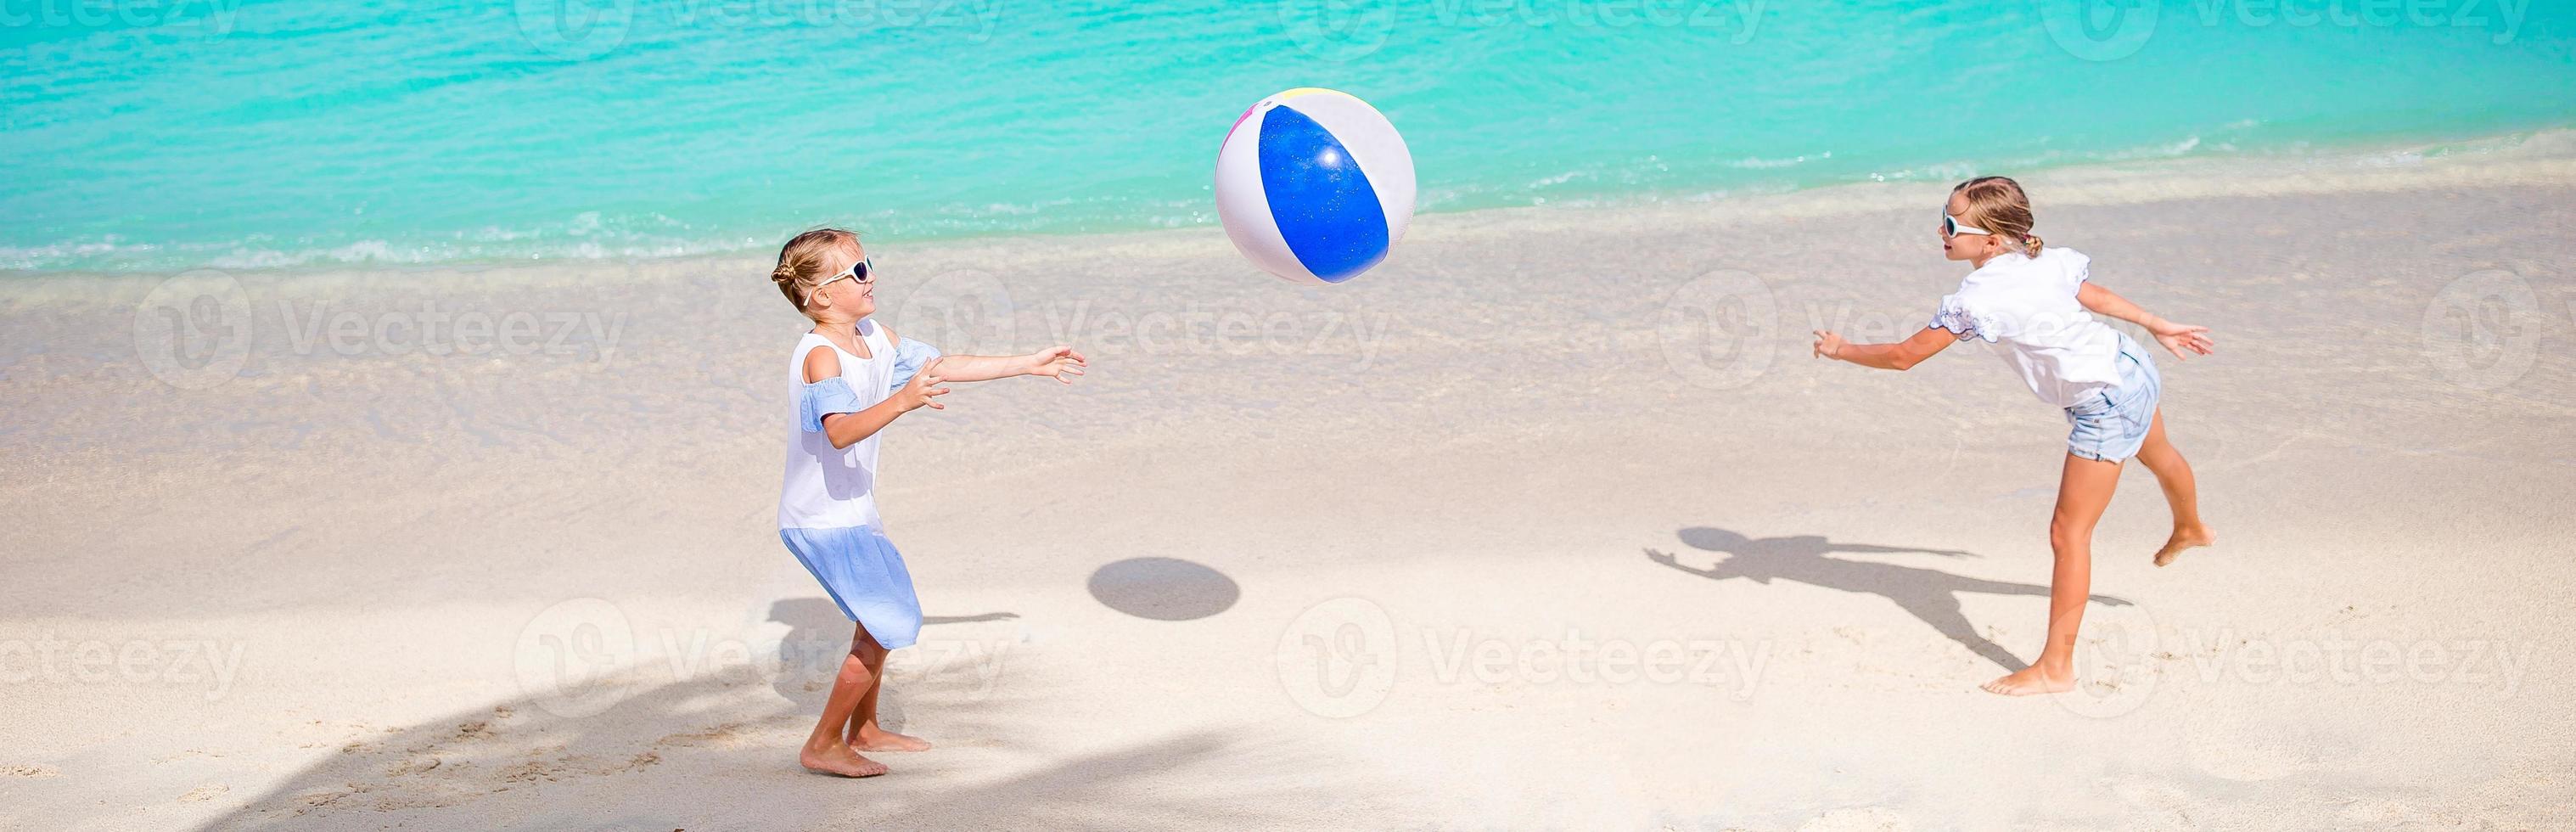 Little adorable girls playing on beach with air ball photo